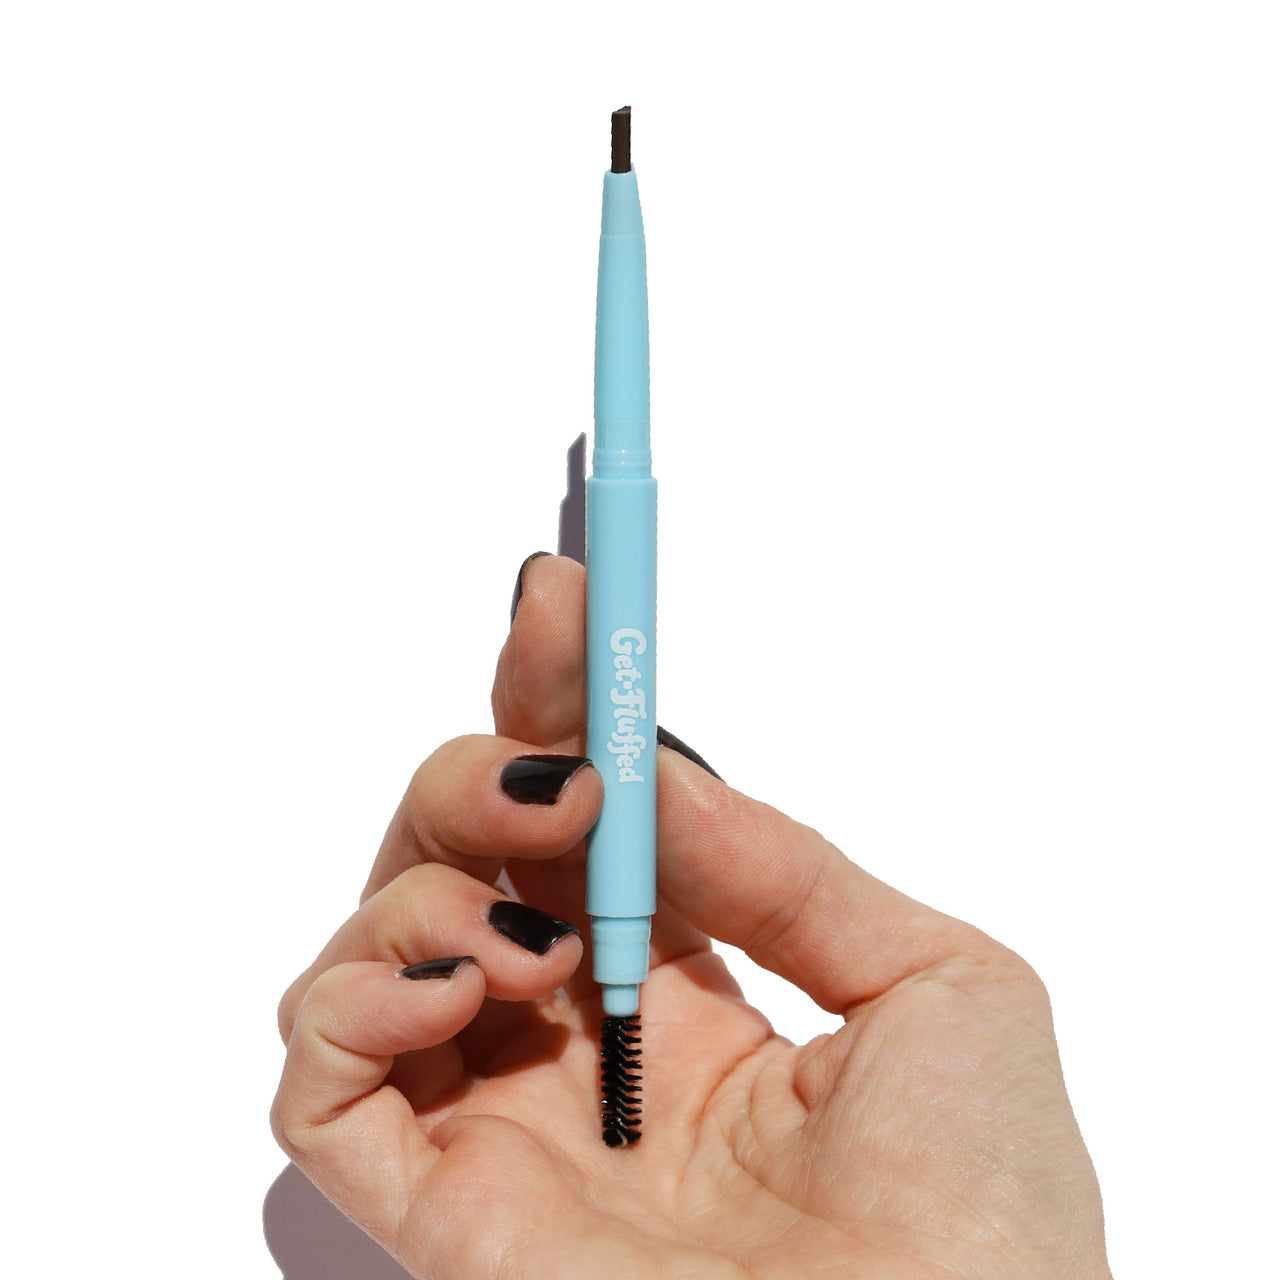 Light blue brow pencil in hand, Fluffy brows, Get Fluffed - Half Caked